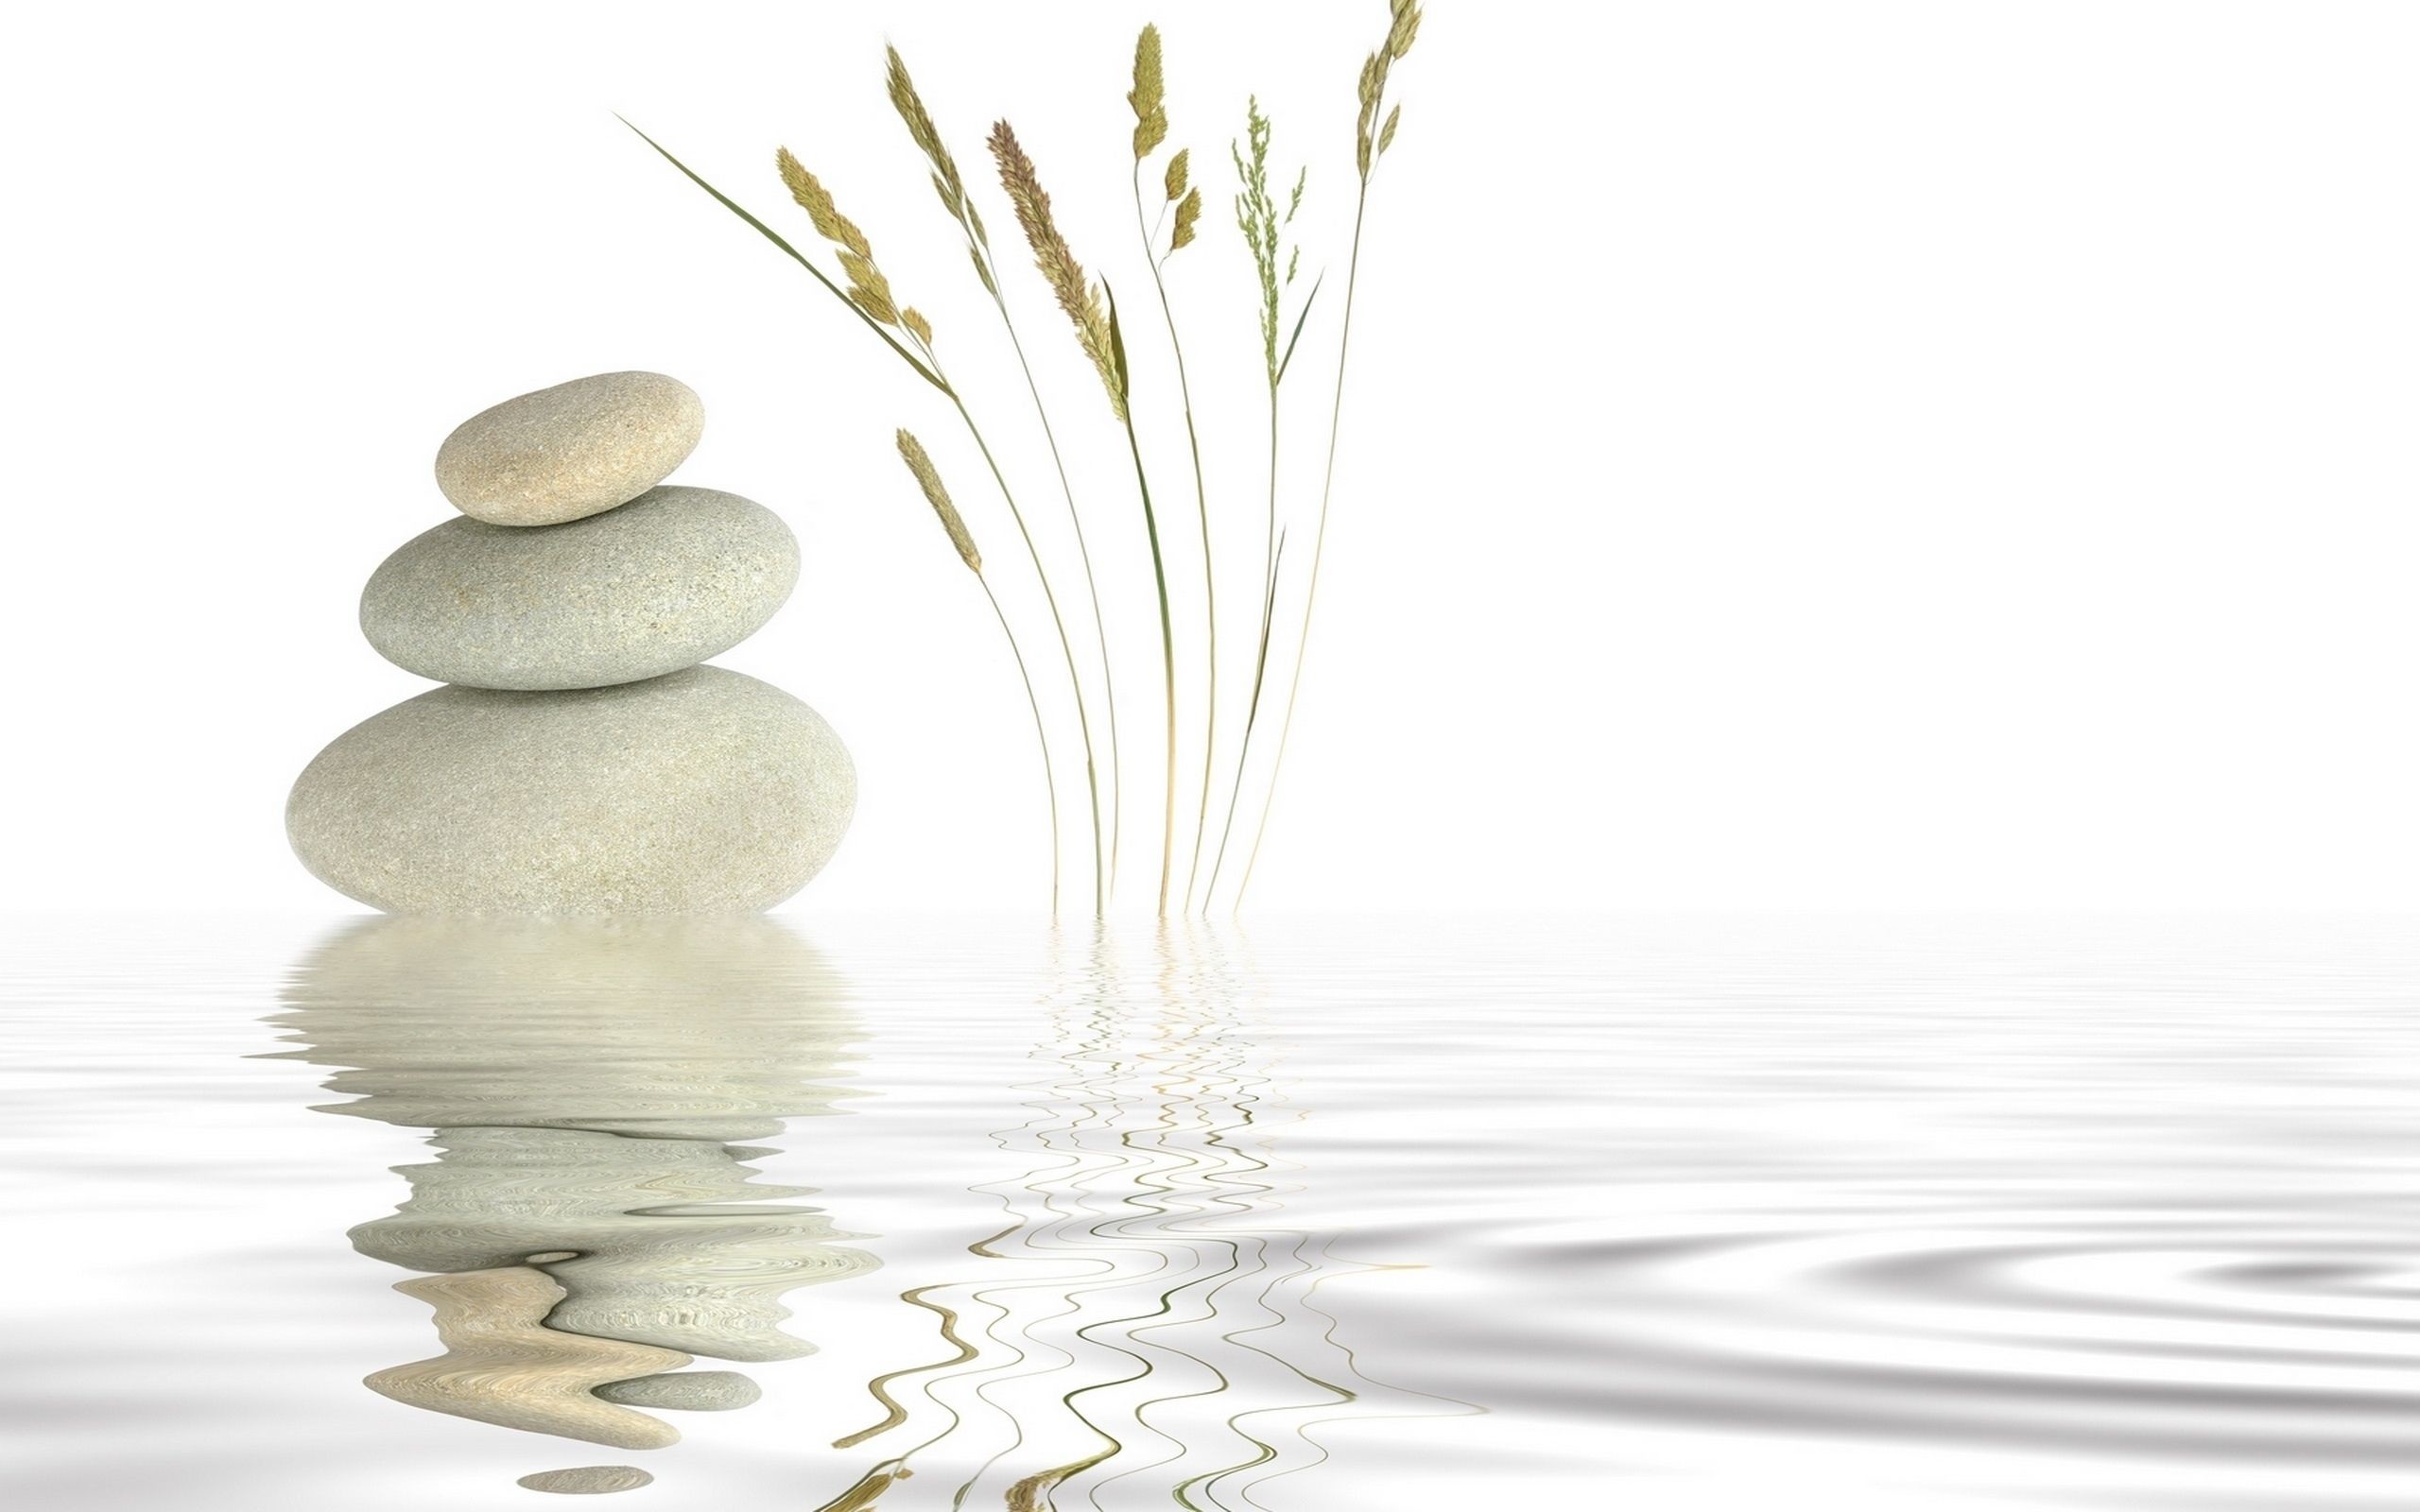 2560x1600 1920x1200 22 Zen Backgrounds for Computer - GsFDcY HD Wallpapers">